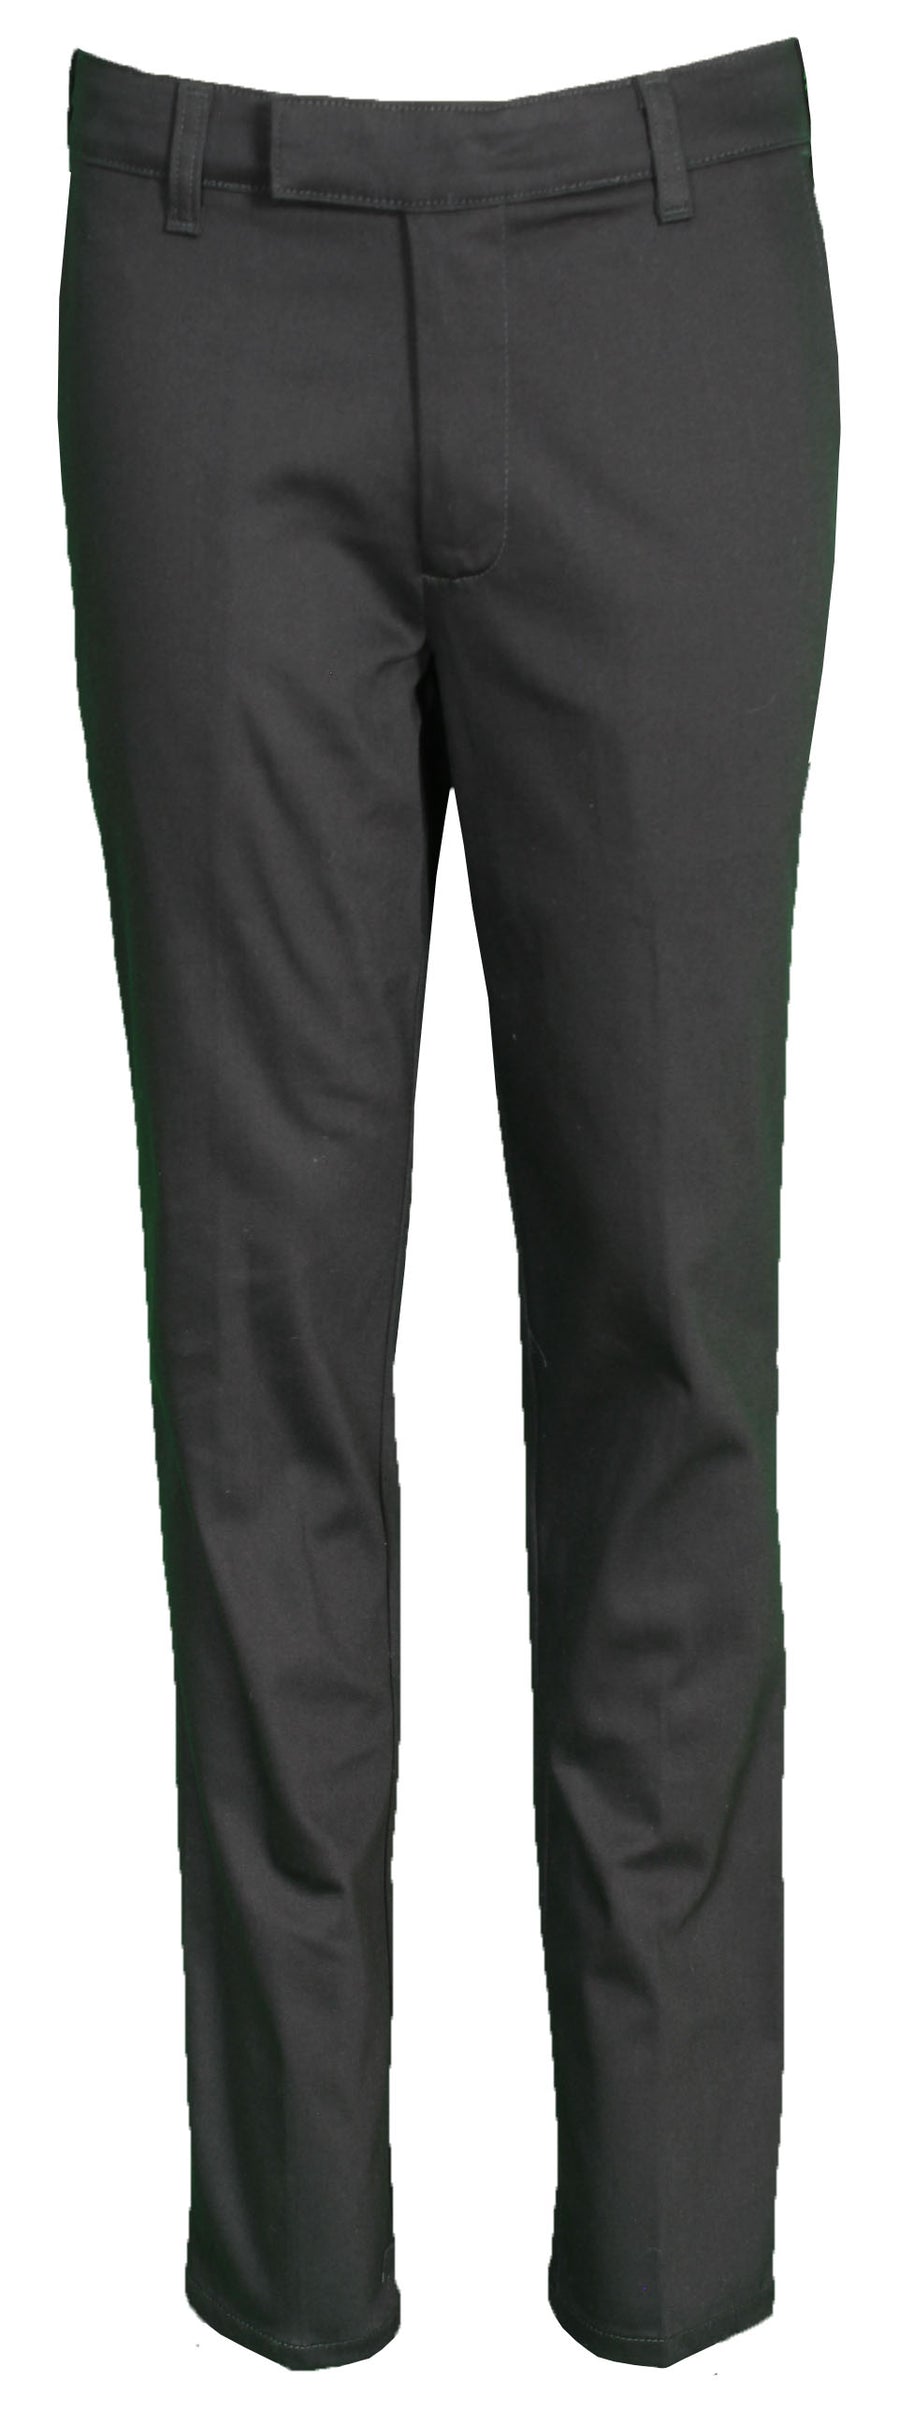 UPLIFT SUMMIT GIRL CONTEMPORY SLENDER FIT PANT